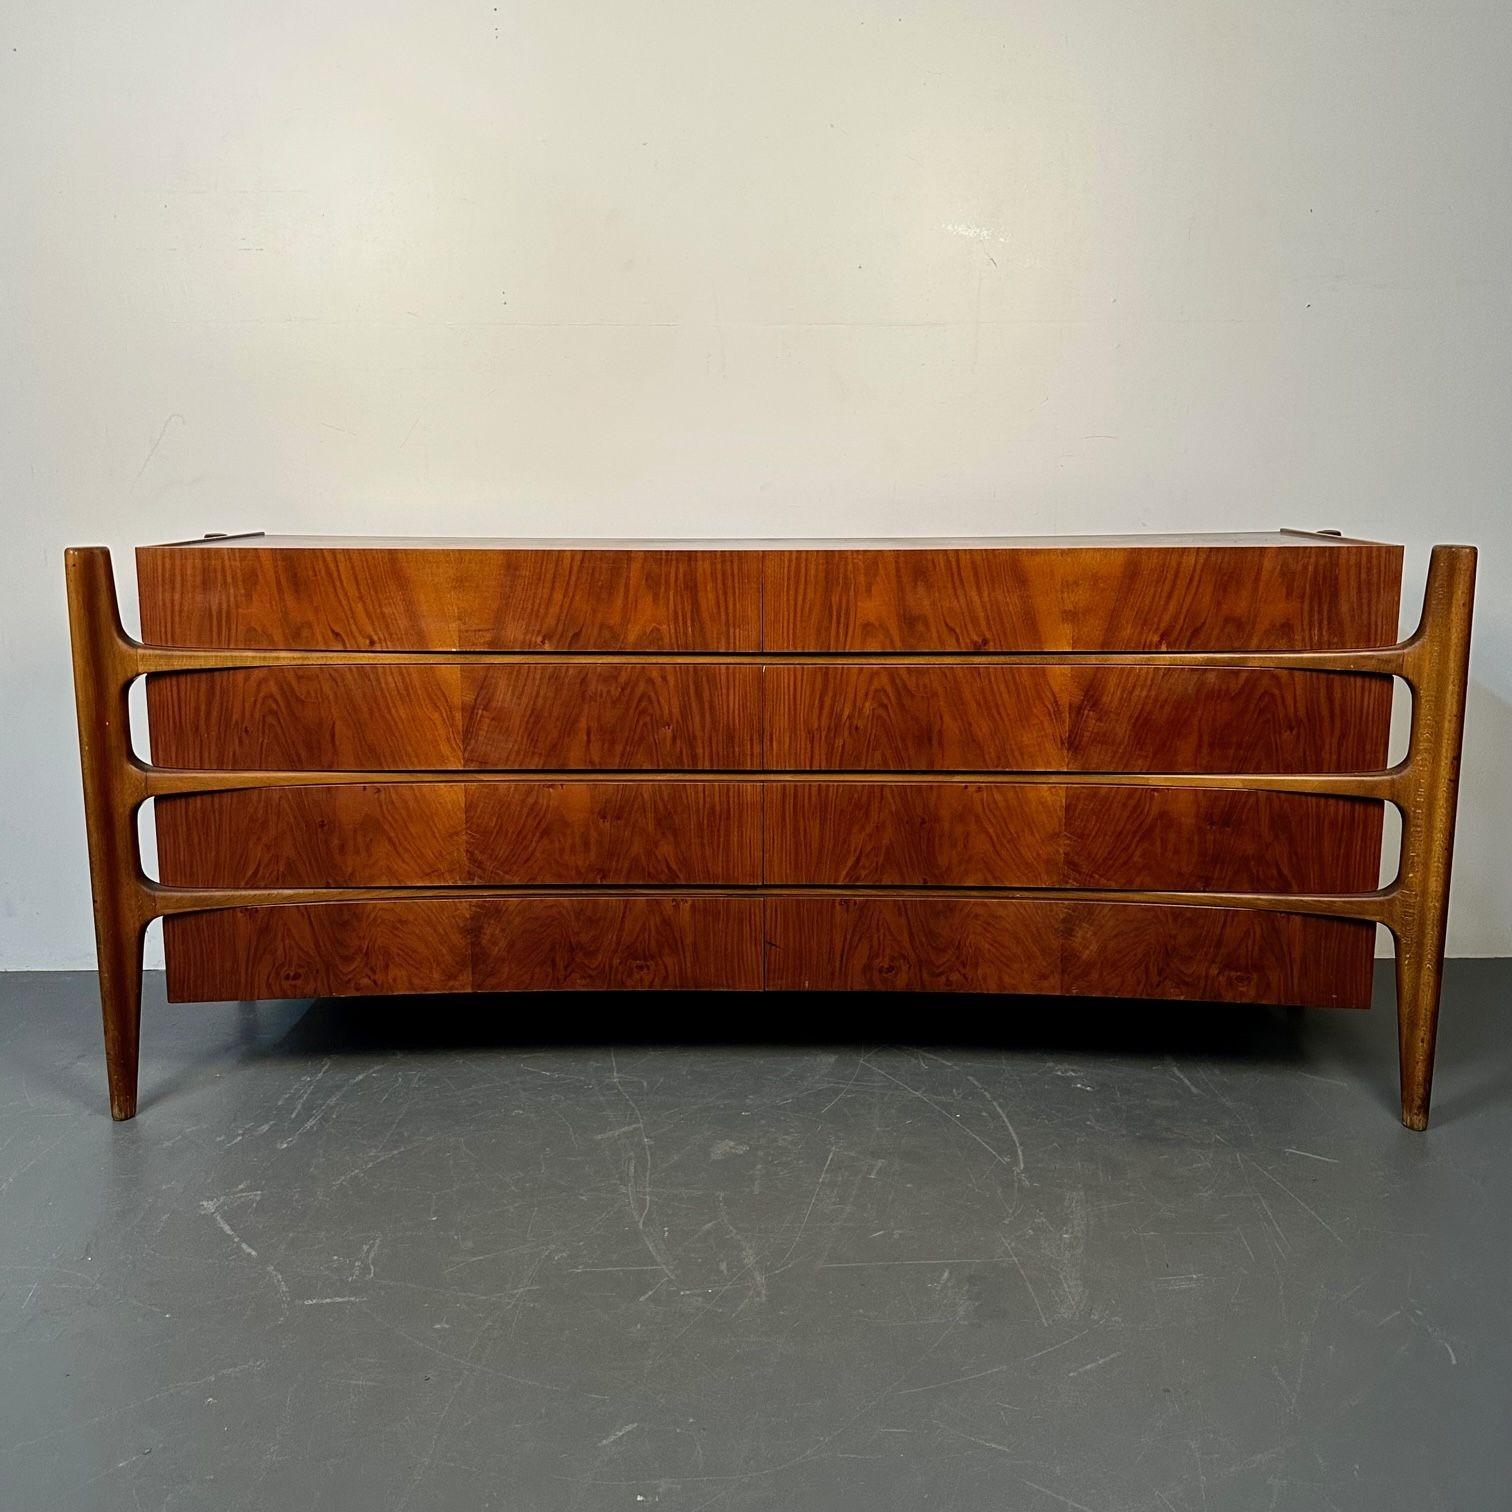 William Hinn, Swedish Mid-Century Modern, Sculptural 'Exoskeleton' Dressers, 1960s

Rare compatible pair of Exoskeleton dressers designed by William Hinn and produced in Sweden circa 1960s. Concave sculpted front design with edge mounted legs.